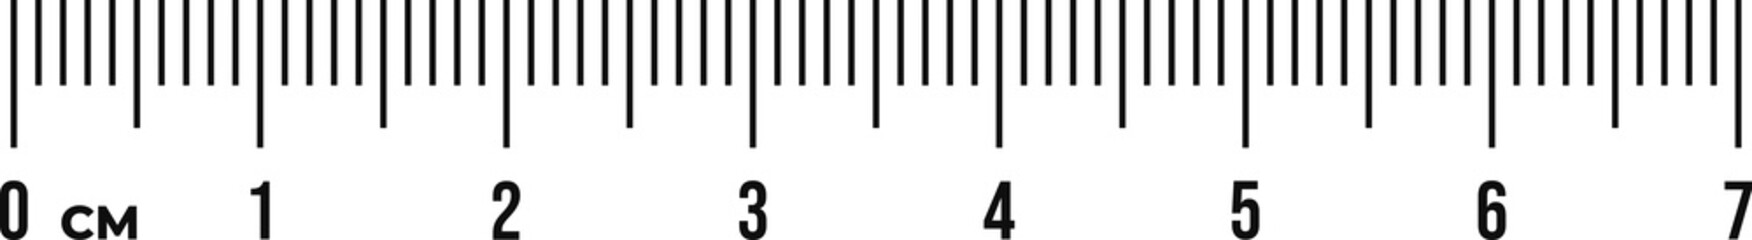 Ruler scale 7 cm. Centimeter scale for measuring